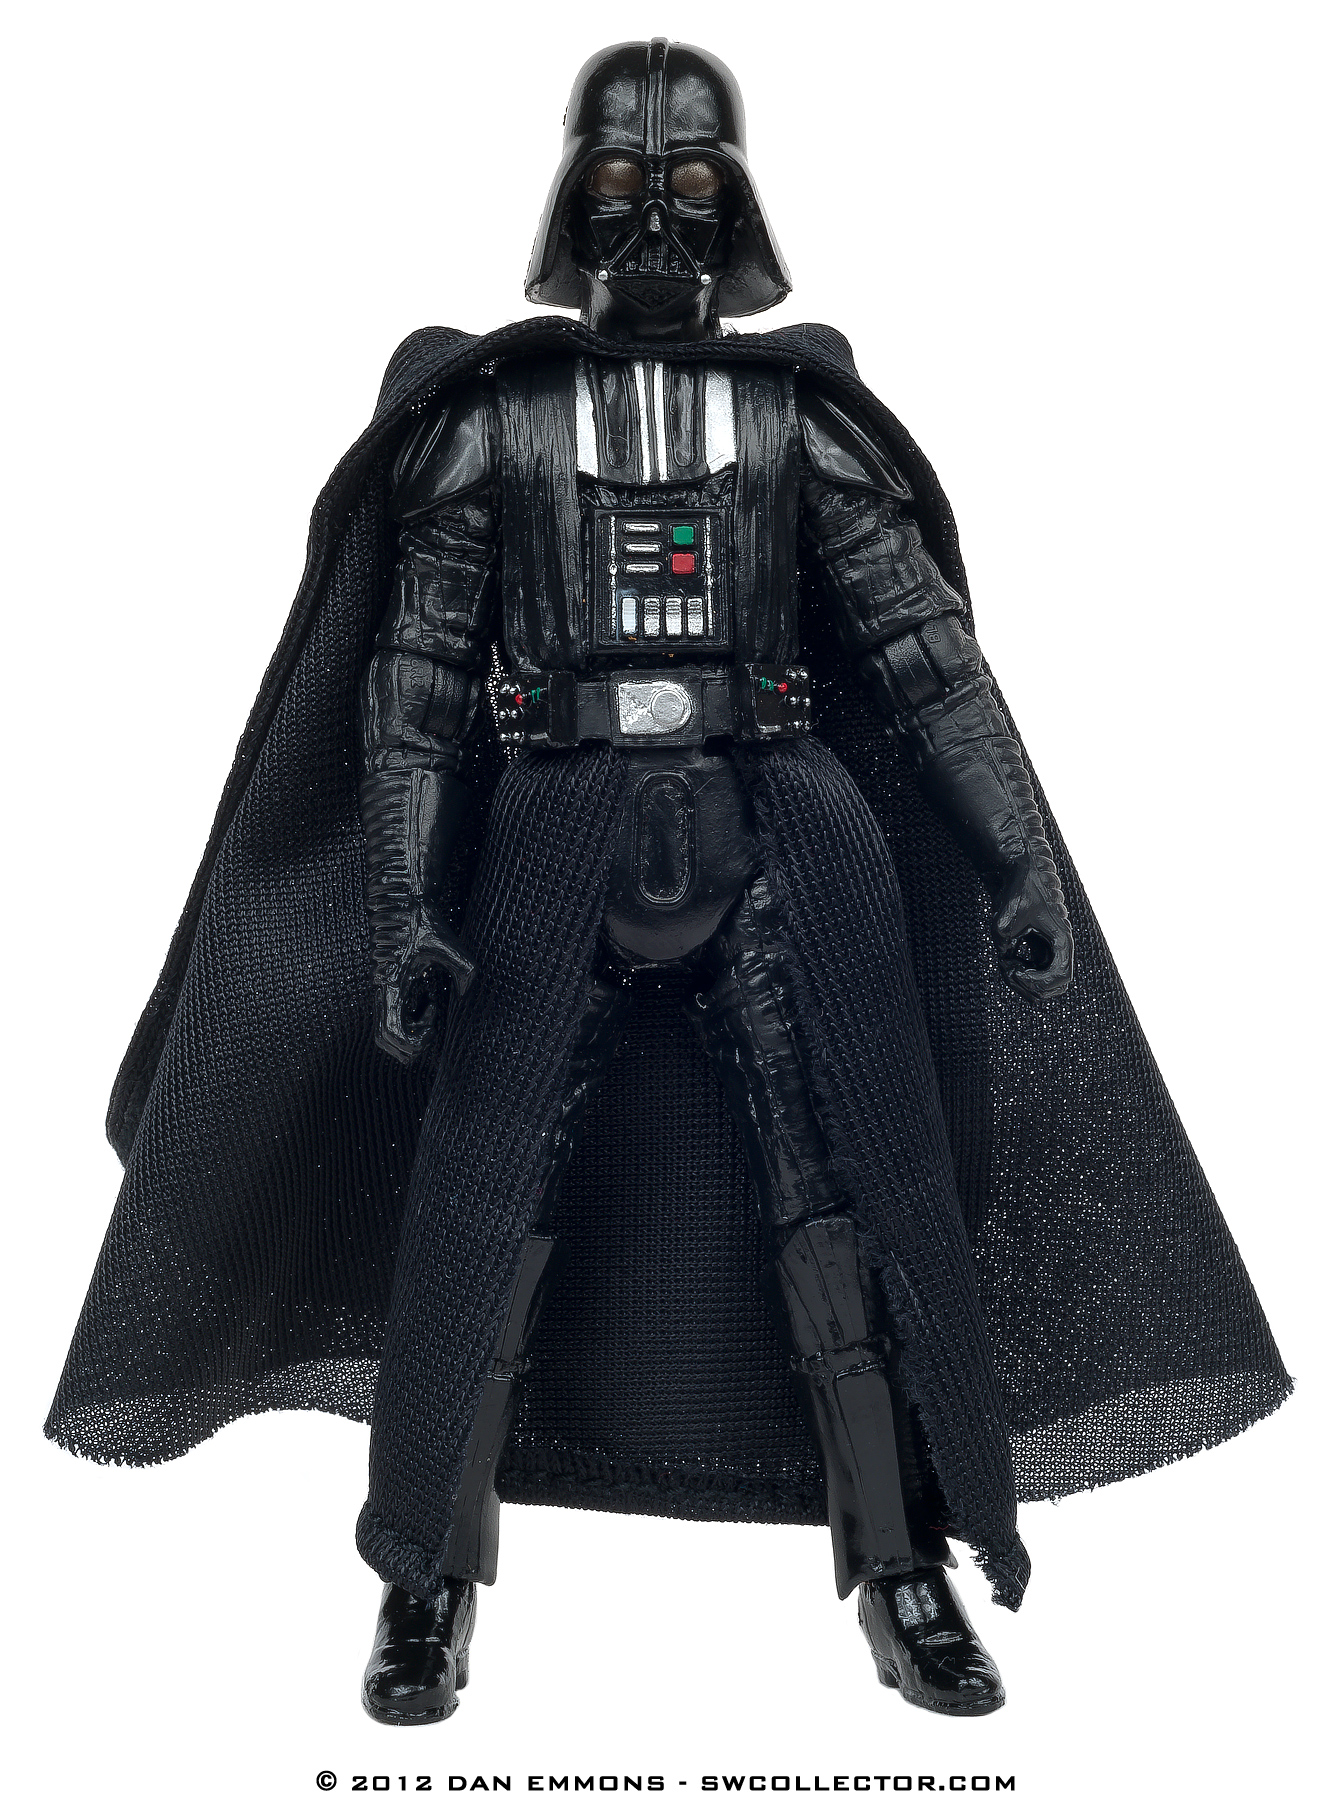 The Vintage Collection - VC93: Darth Vader